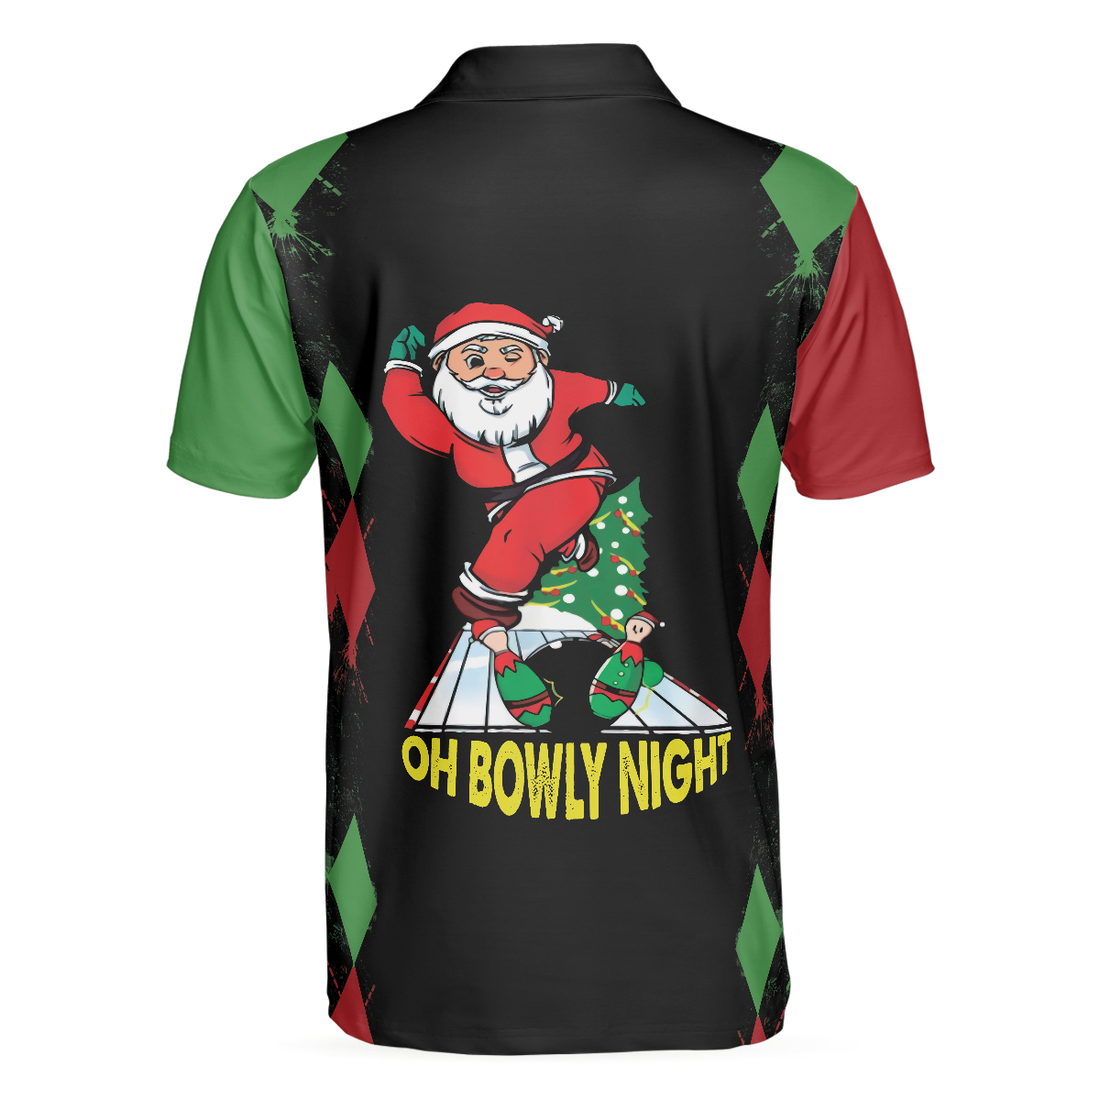 Bowly Night Polo Shirt Christmas Themed Polo Shirt Design Best Christmas Gift Idea For Bowling Lovers - 1